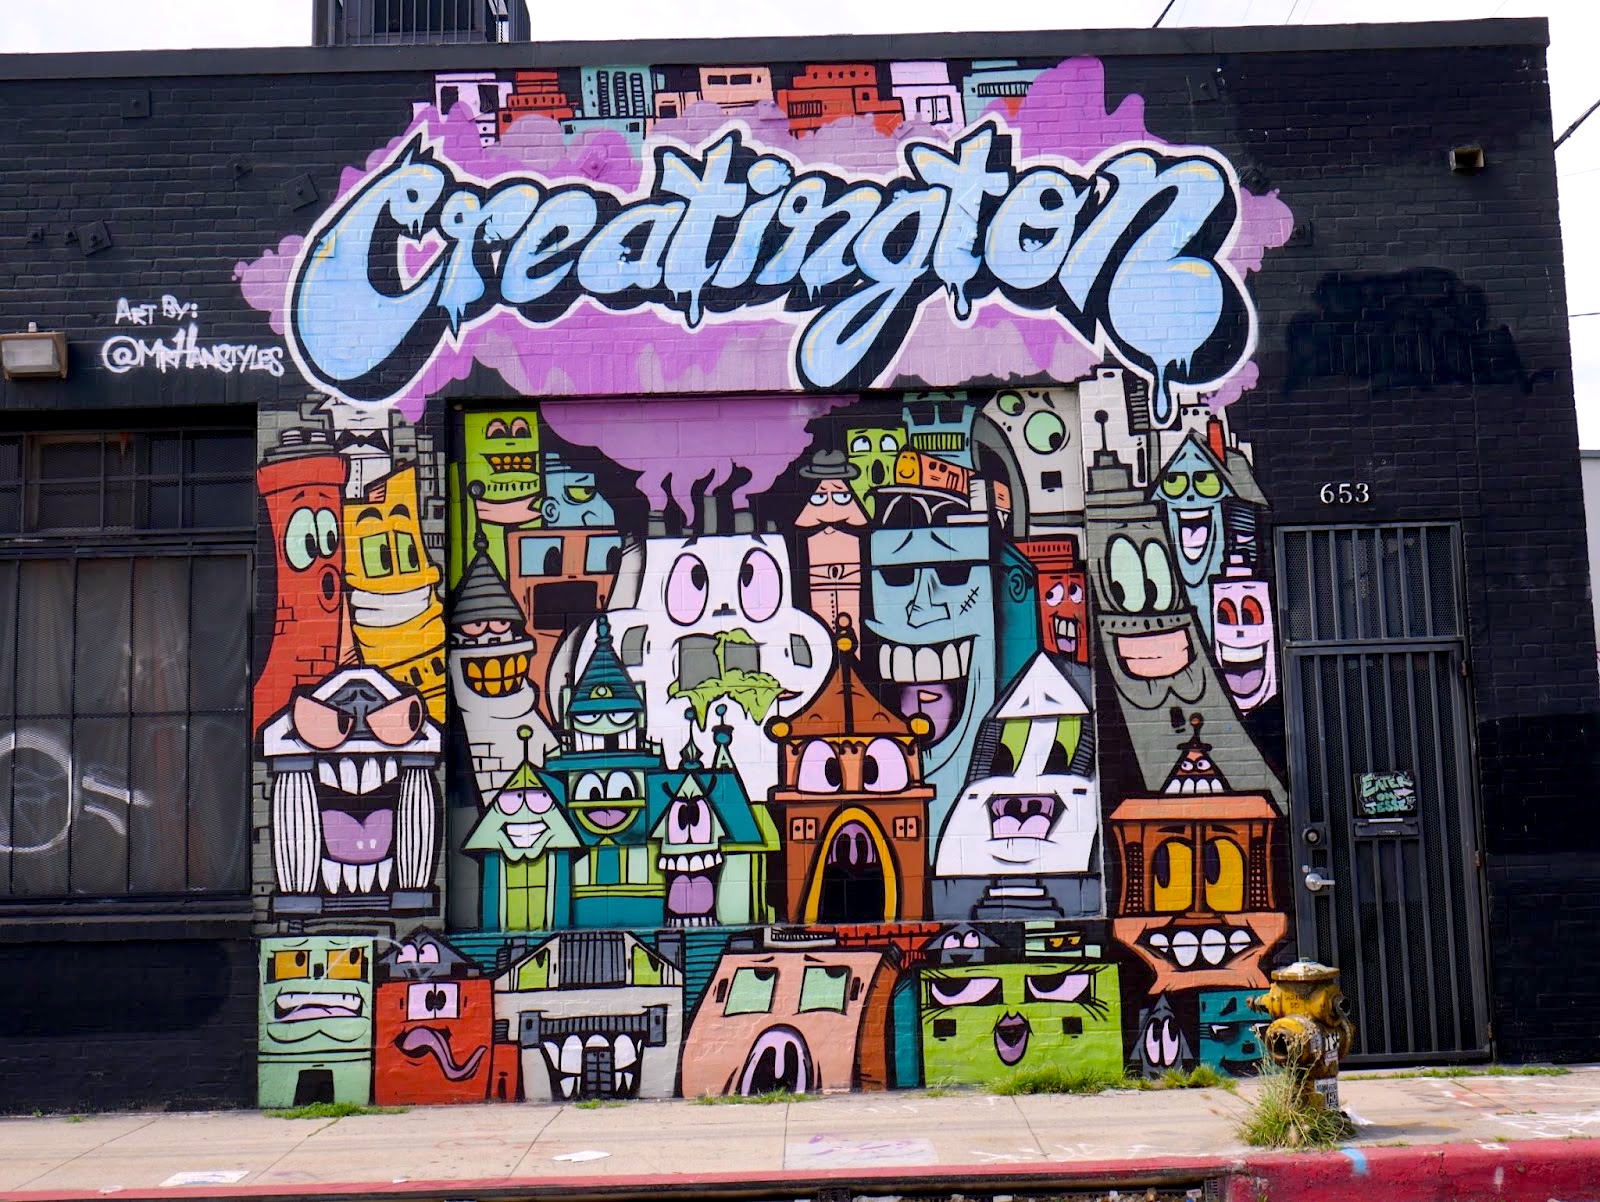 A variety of cartoon buildings with human-like qualities is painted on a building